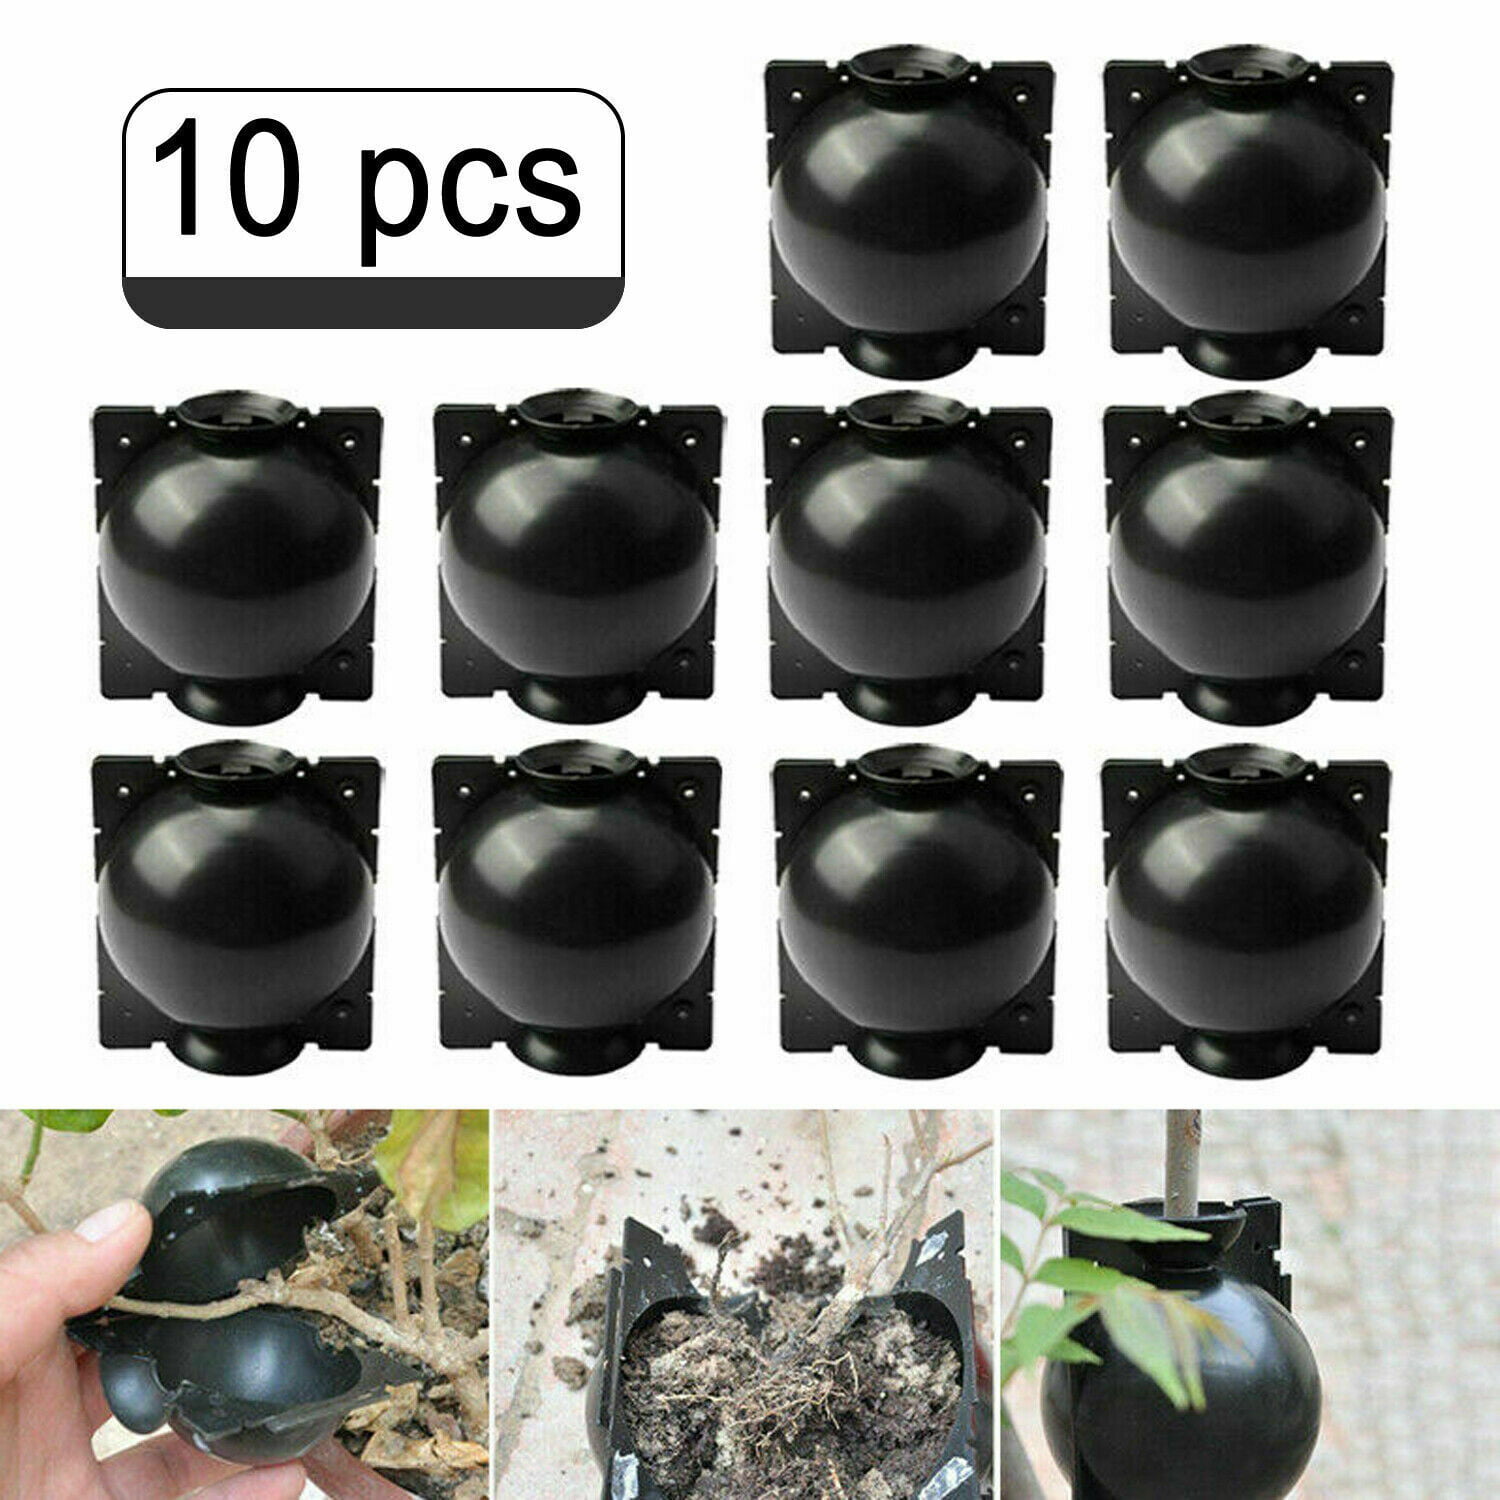 Details about   10Pcs Clear Visible Plant Root Grow Graft Balls High Pressure Propagation Boxes 